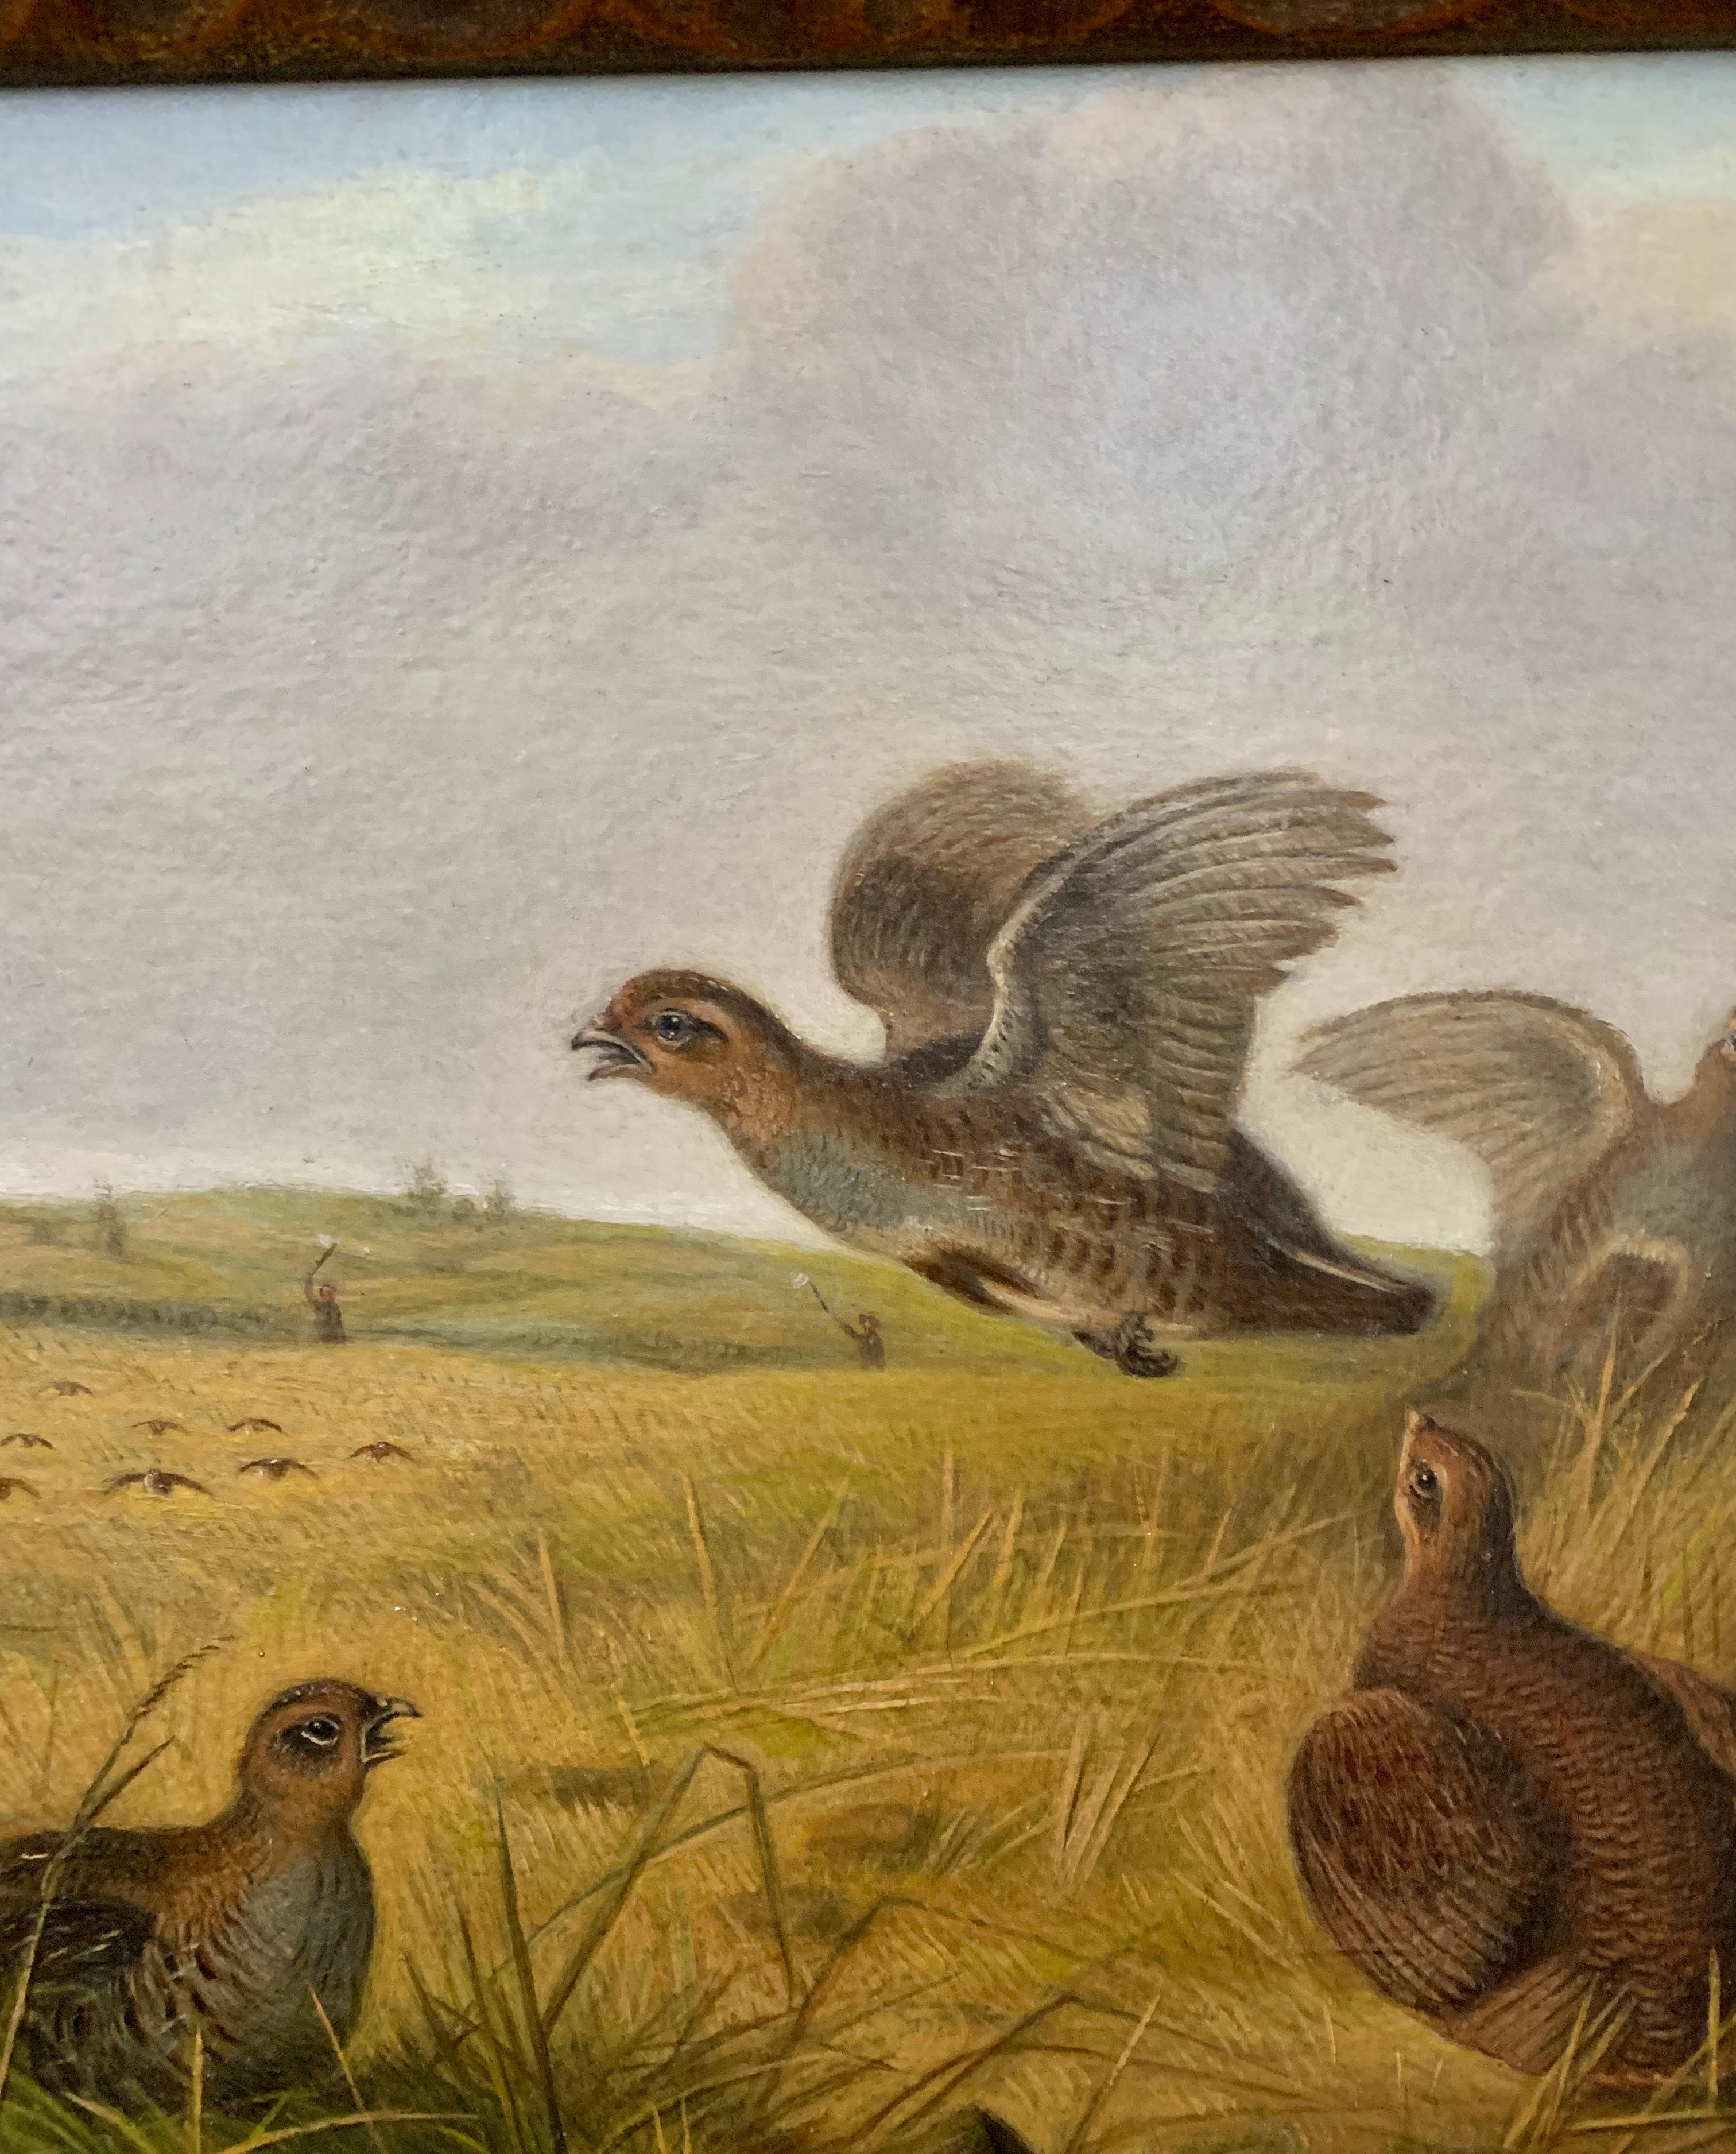 English 19th century, Pheasants at flight during a shoot in an English landscape - Painting by Follower of Stephen Elmer